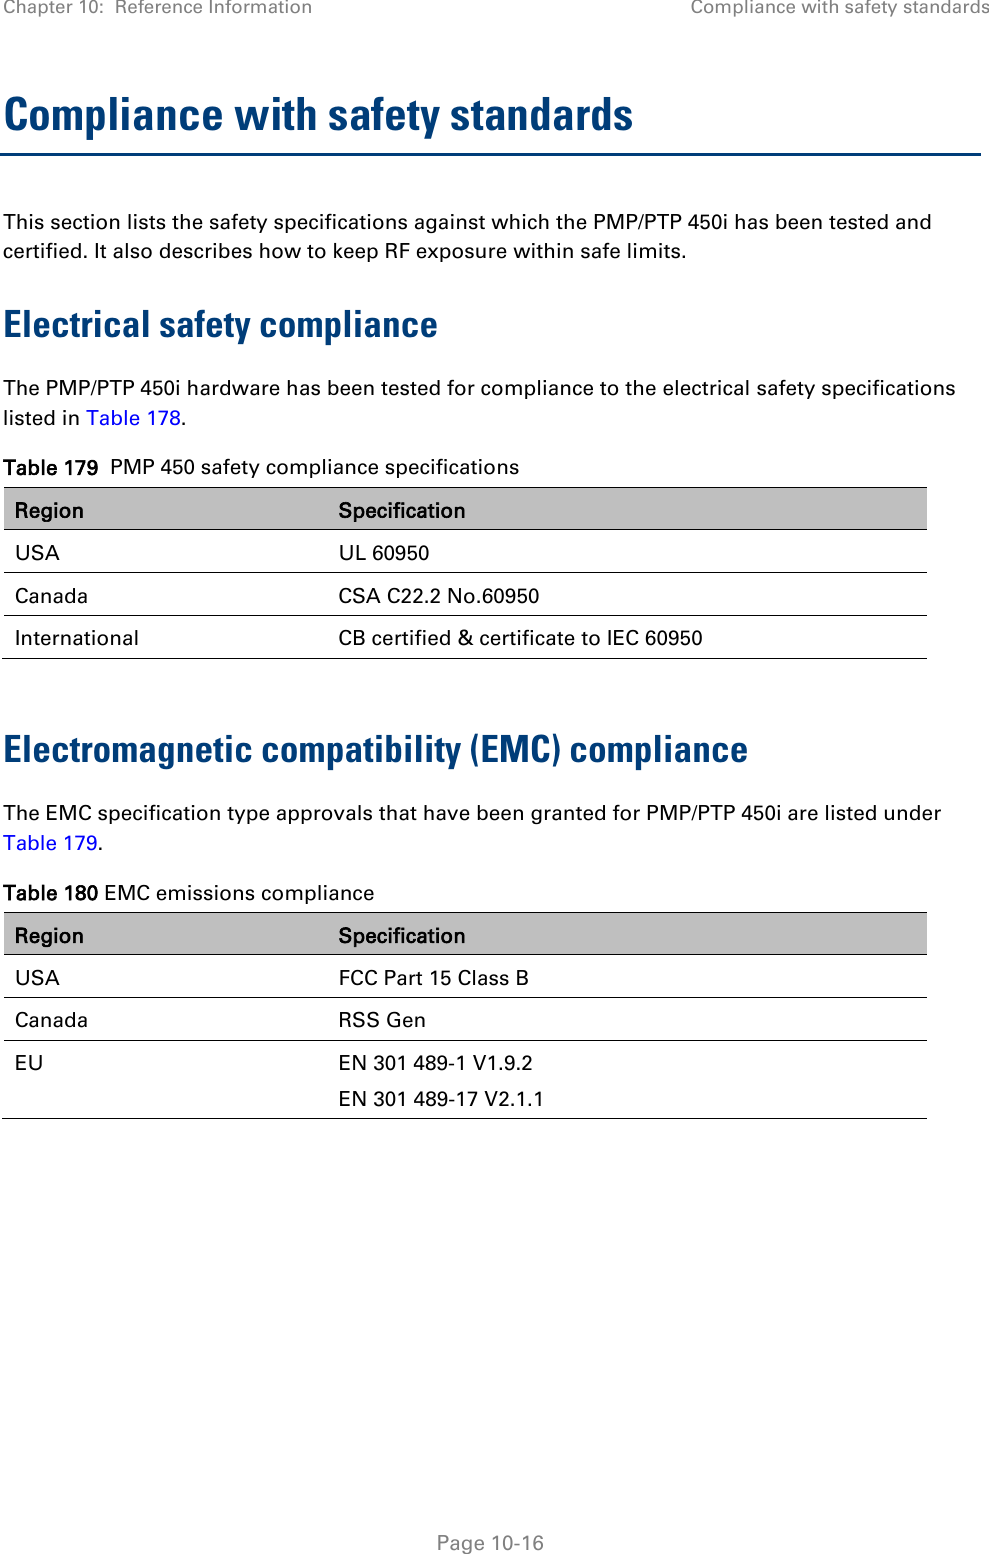 Chapter 10:  Reference Information Compliance with safety standards   Page 10-16 Compliance with safety standards This section lists the safety specifications against which the PMP/PTP 450i has been tested and certified. It also describes how to keep RF exposure within safe limits. Electrical safety compliance  The PMP/PTP 450i hardware has been tested for compliance to the electrical safety specifications listed in Table 178. Table 179  PMP 450 safety compliance specifications Region Specification USA UL 60950 Canada CSA C22.2 No.60950 International CB certified &amp; certificate to IEC 60950  Electromagnetic compatibility (EMC) compliance The EMC specification type approvals that have been granted for PMP/PTP 450i are listed under Table 179. Table 180 EMC emissions compliance Region Specification USA FCC Part 15 Class B Canada RSS Gen EU EN 301 489-1 V1.9.2 EN 301 489-17 V2.1.1  